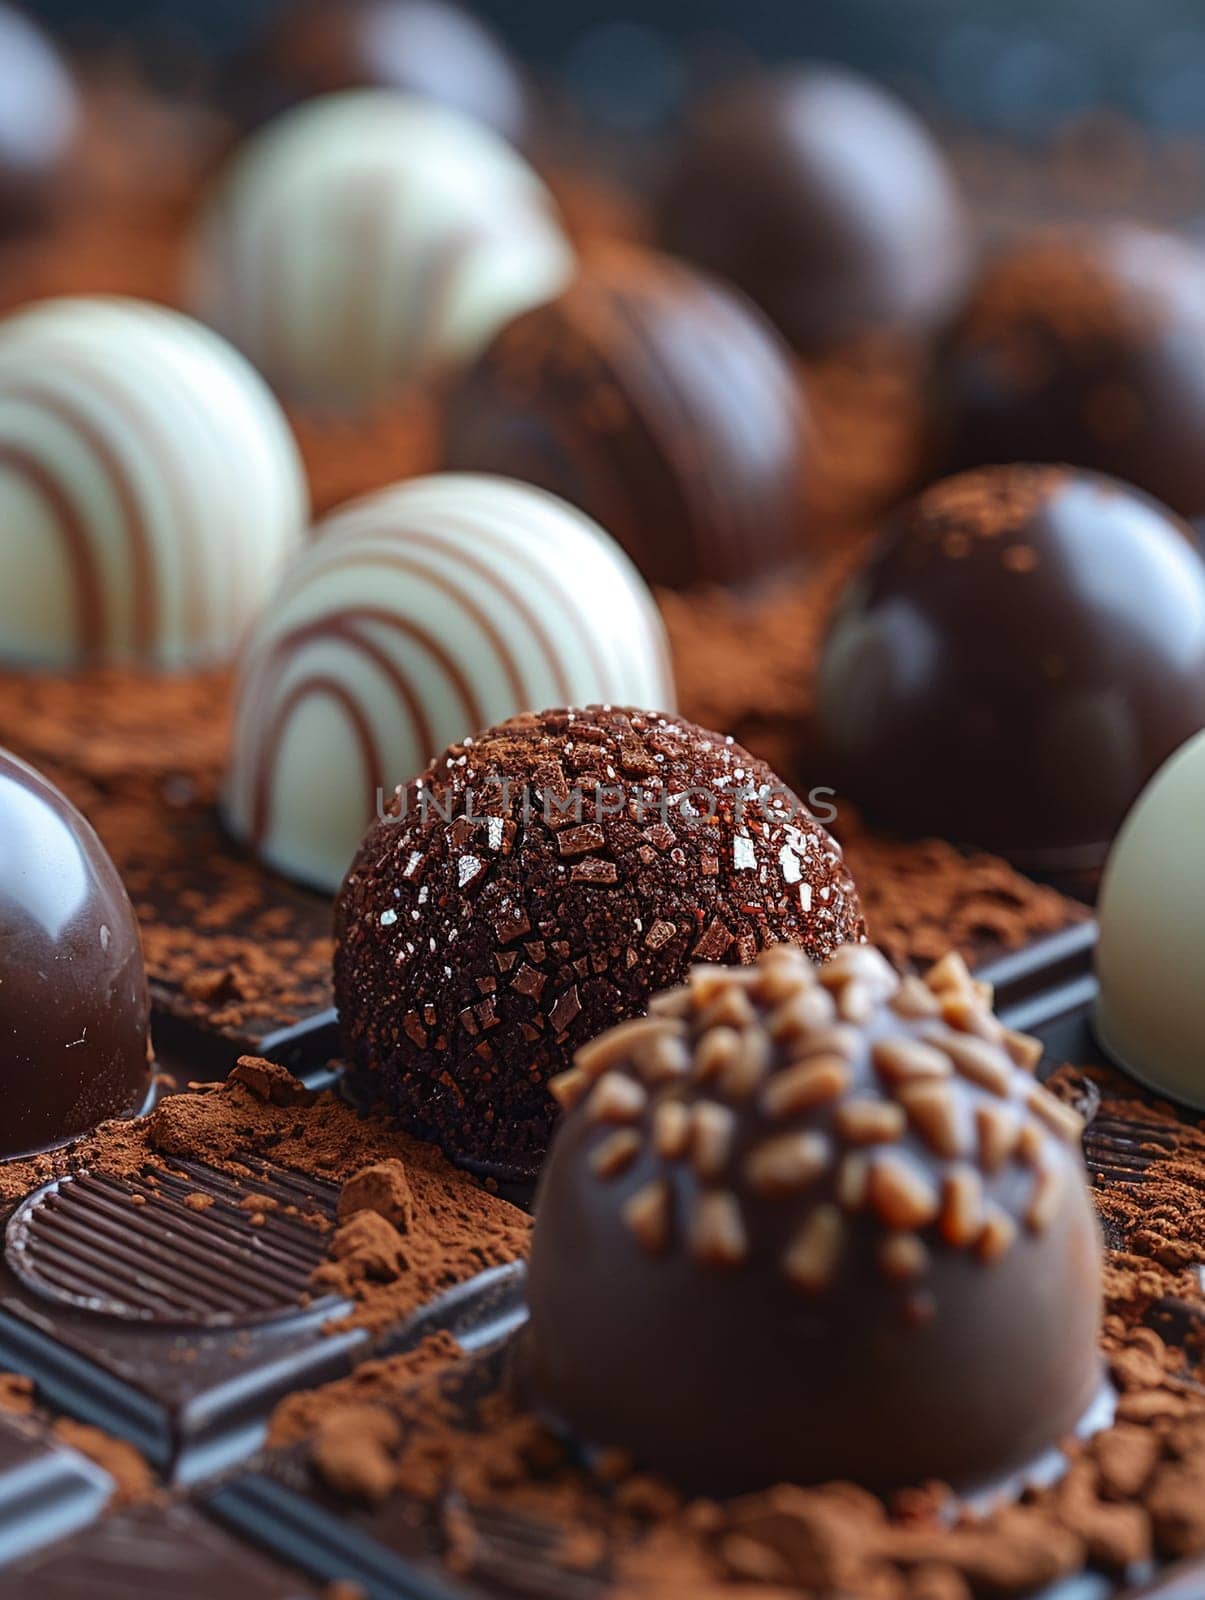 Artisanal Chocolate Truffles Melt Indulgence in Business of Confectionery, Molds and cocoa dust a scene of sweet artistry in the chocolate business.